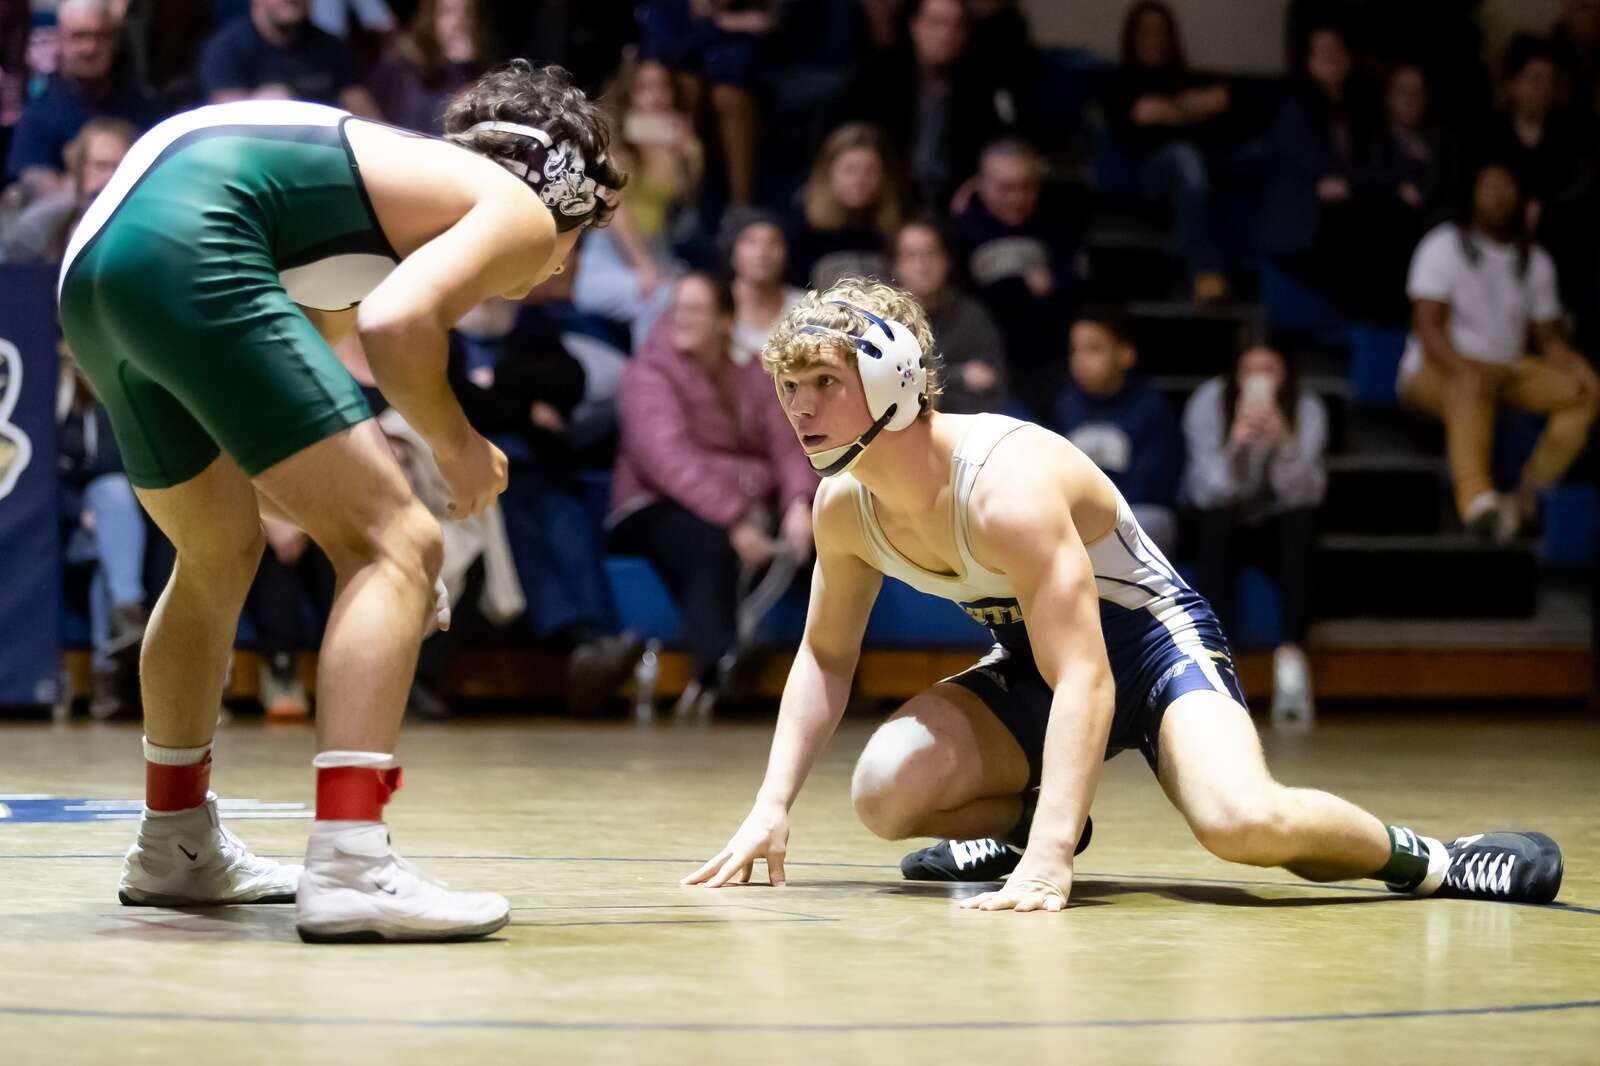 Butler’s Ira Stiefel seeks out the low-angle against Pine-Richland’s Robert Hoy